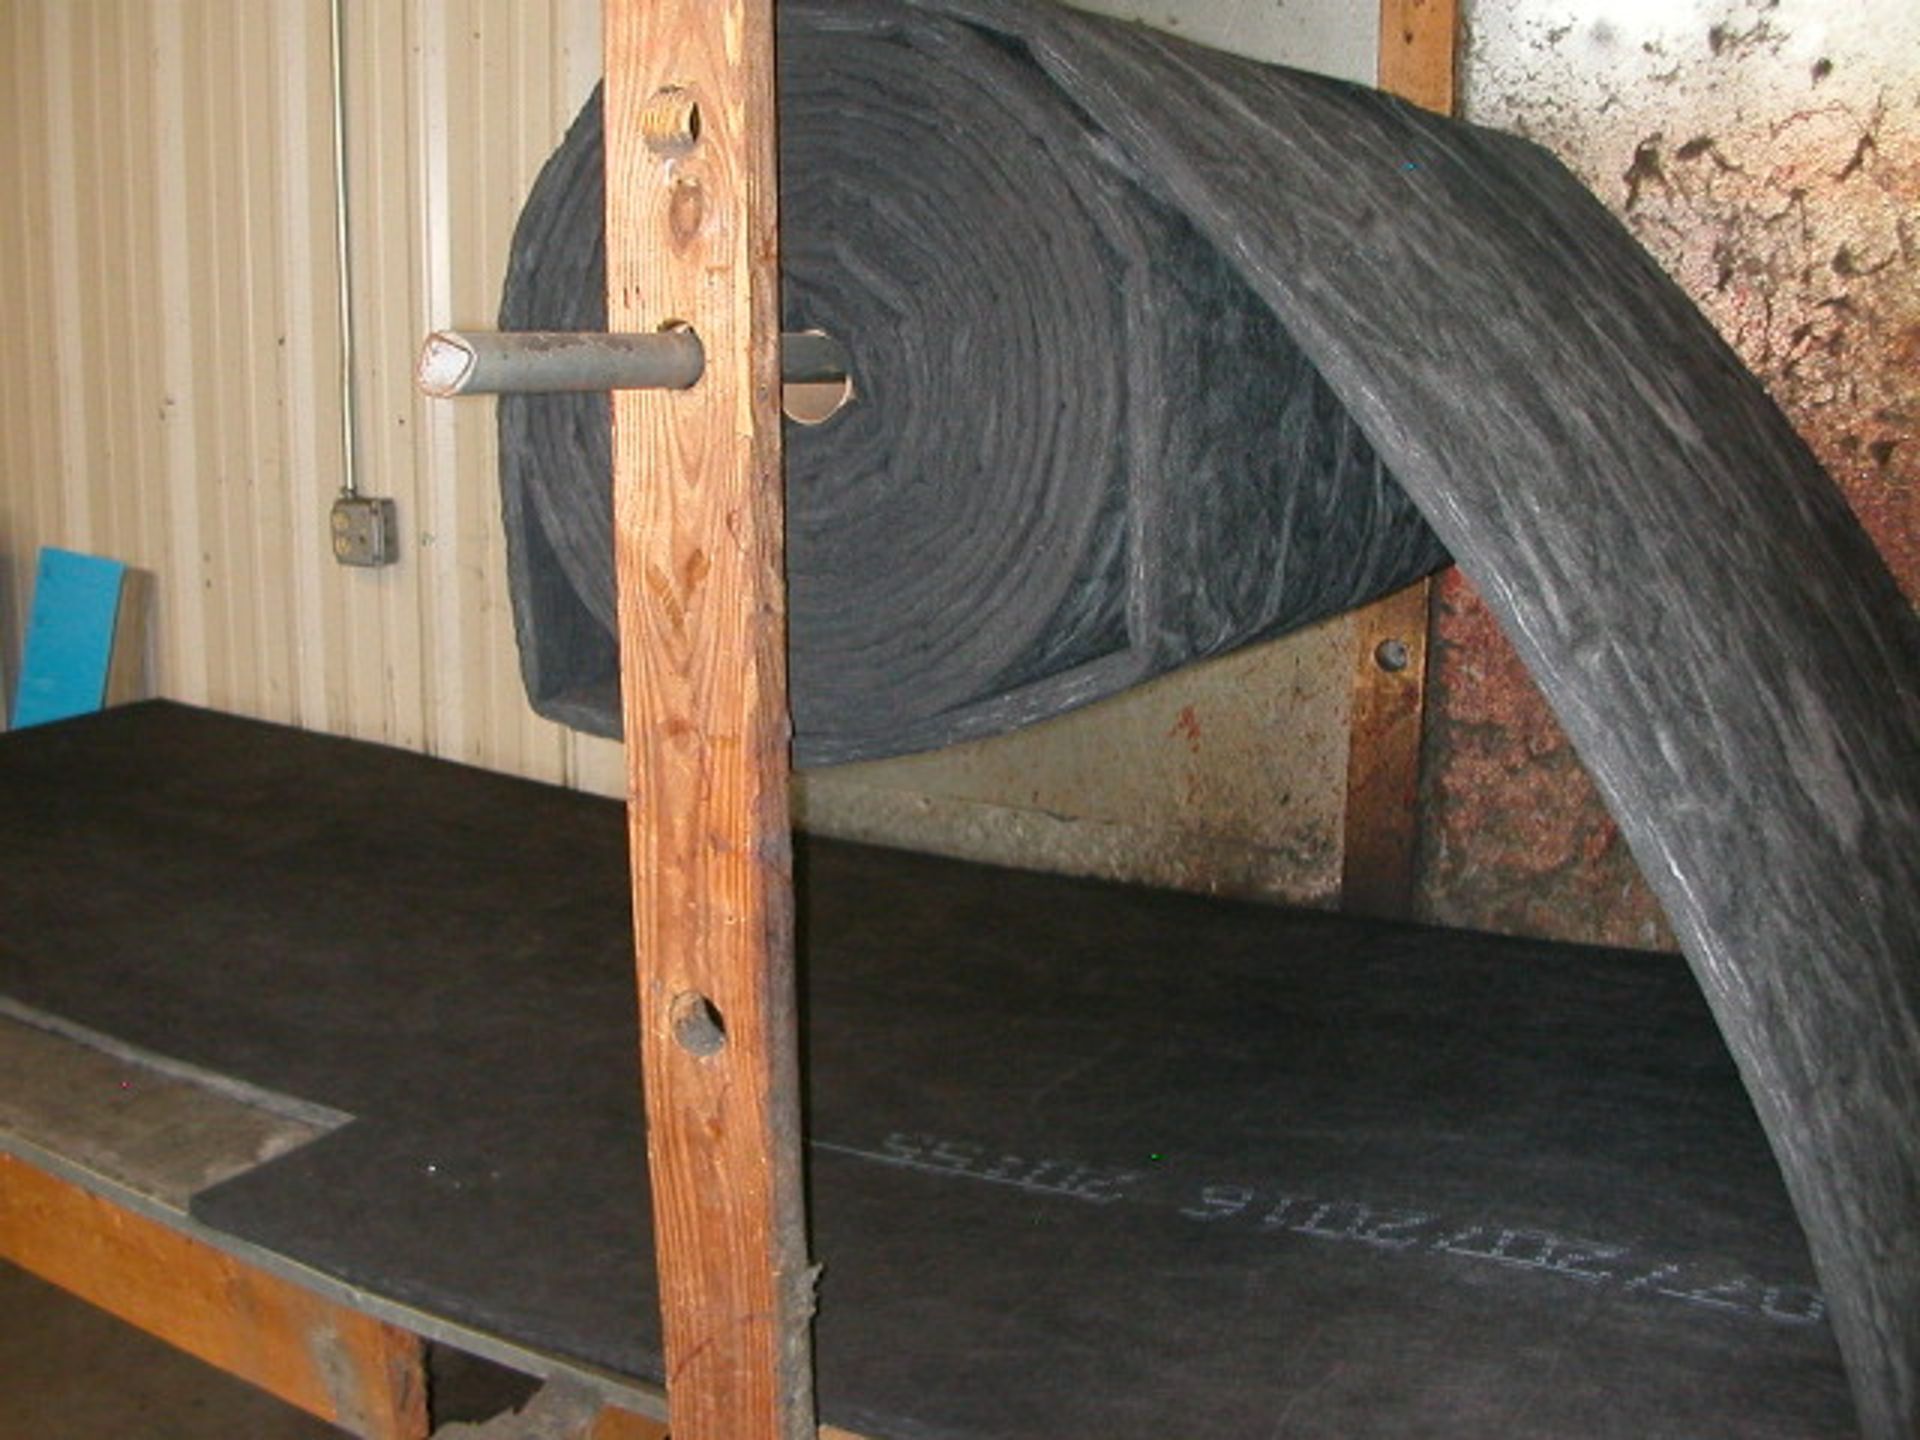 Vent Hood, Roll of Insulation, & Insulation Spray Installation Work Table/Area - Image 2 of 3